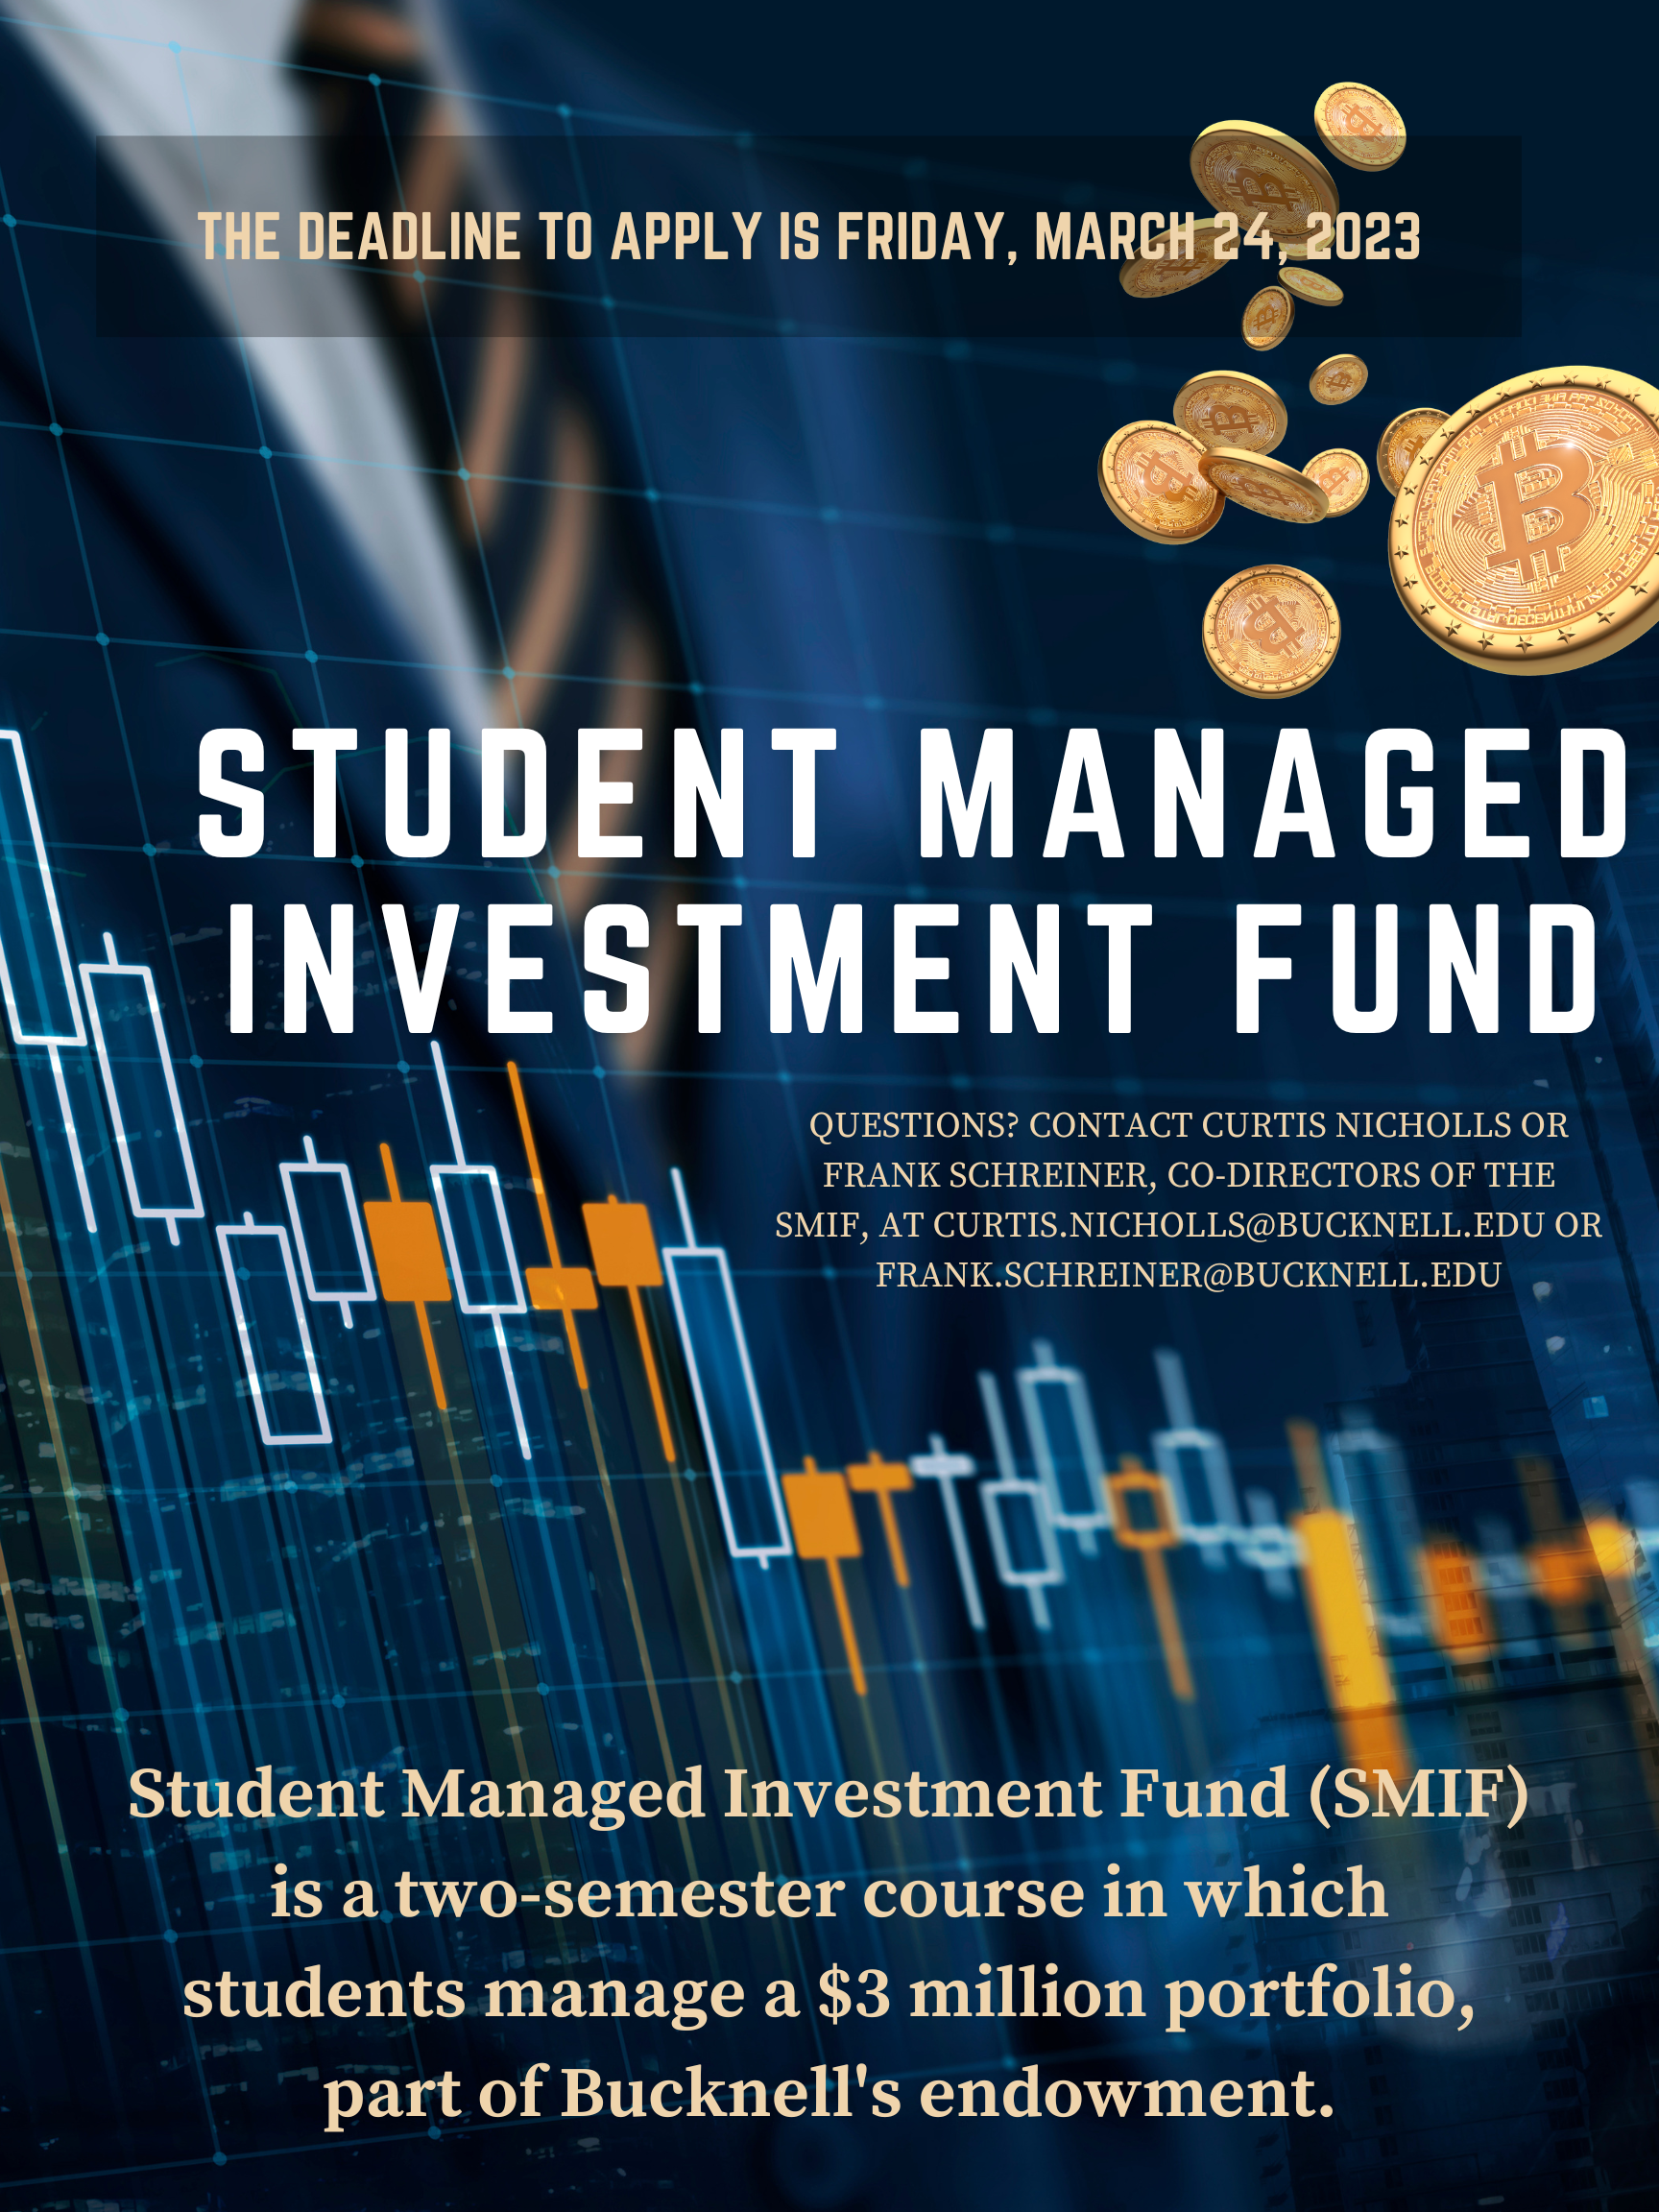 Student Managed Investment Fund Applications due March 24th